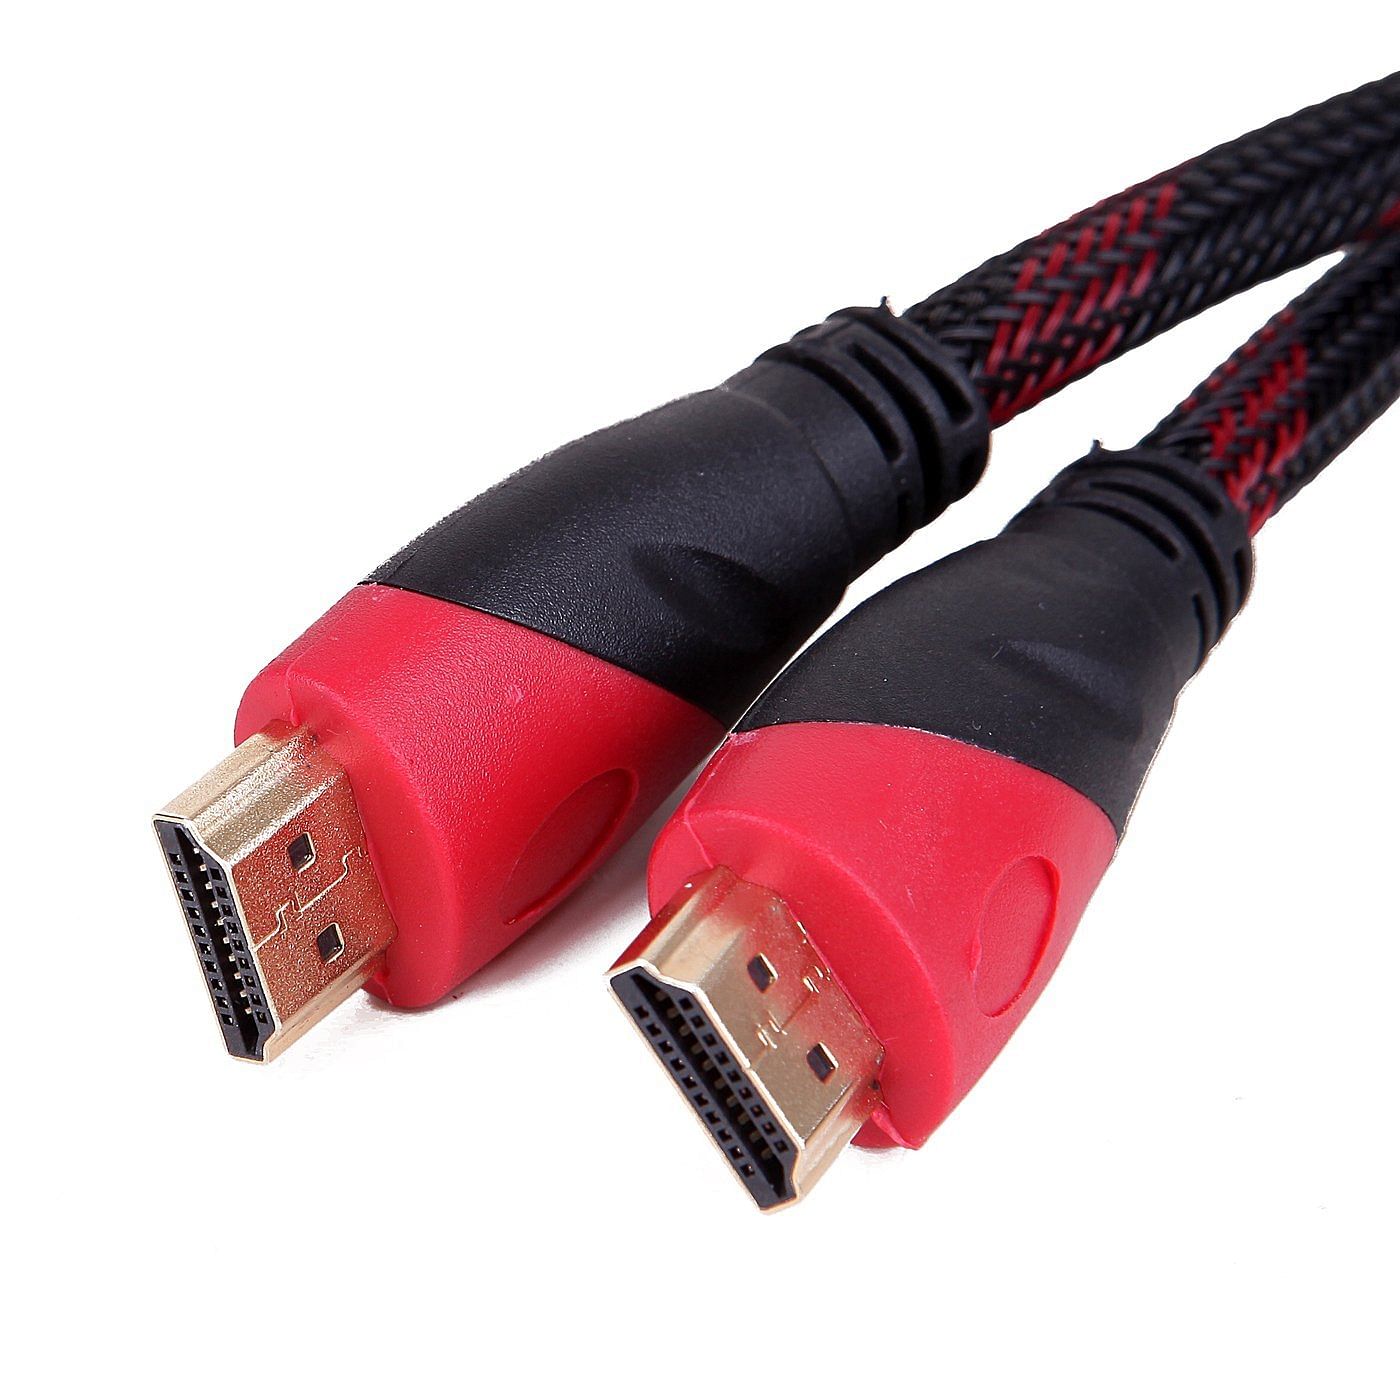 hdmi cable with ethernet